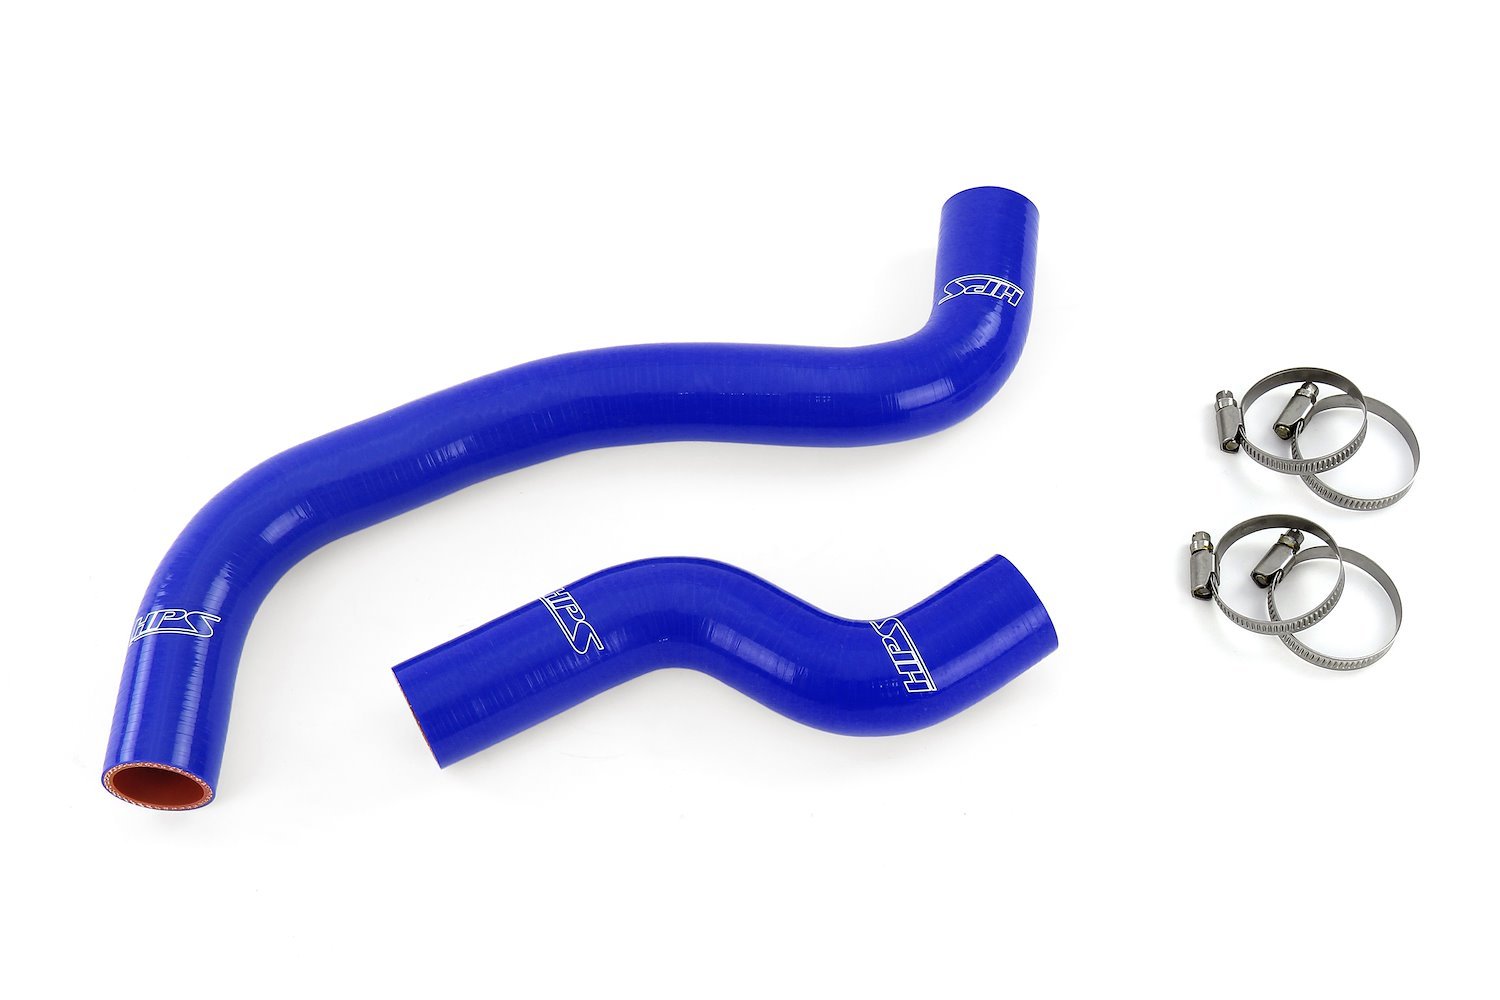 57-1081-BLUE Radiator Hose Kit, 3-Ply Reinforced Silicone, Replaces Rubber Radiator Coolant Hoses